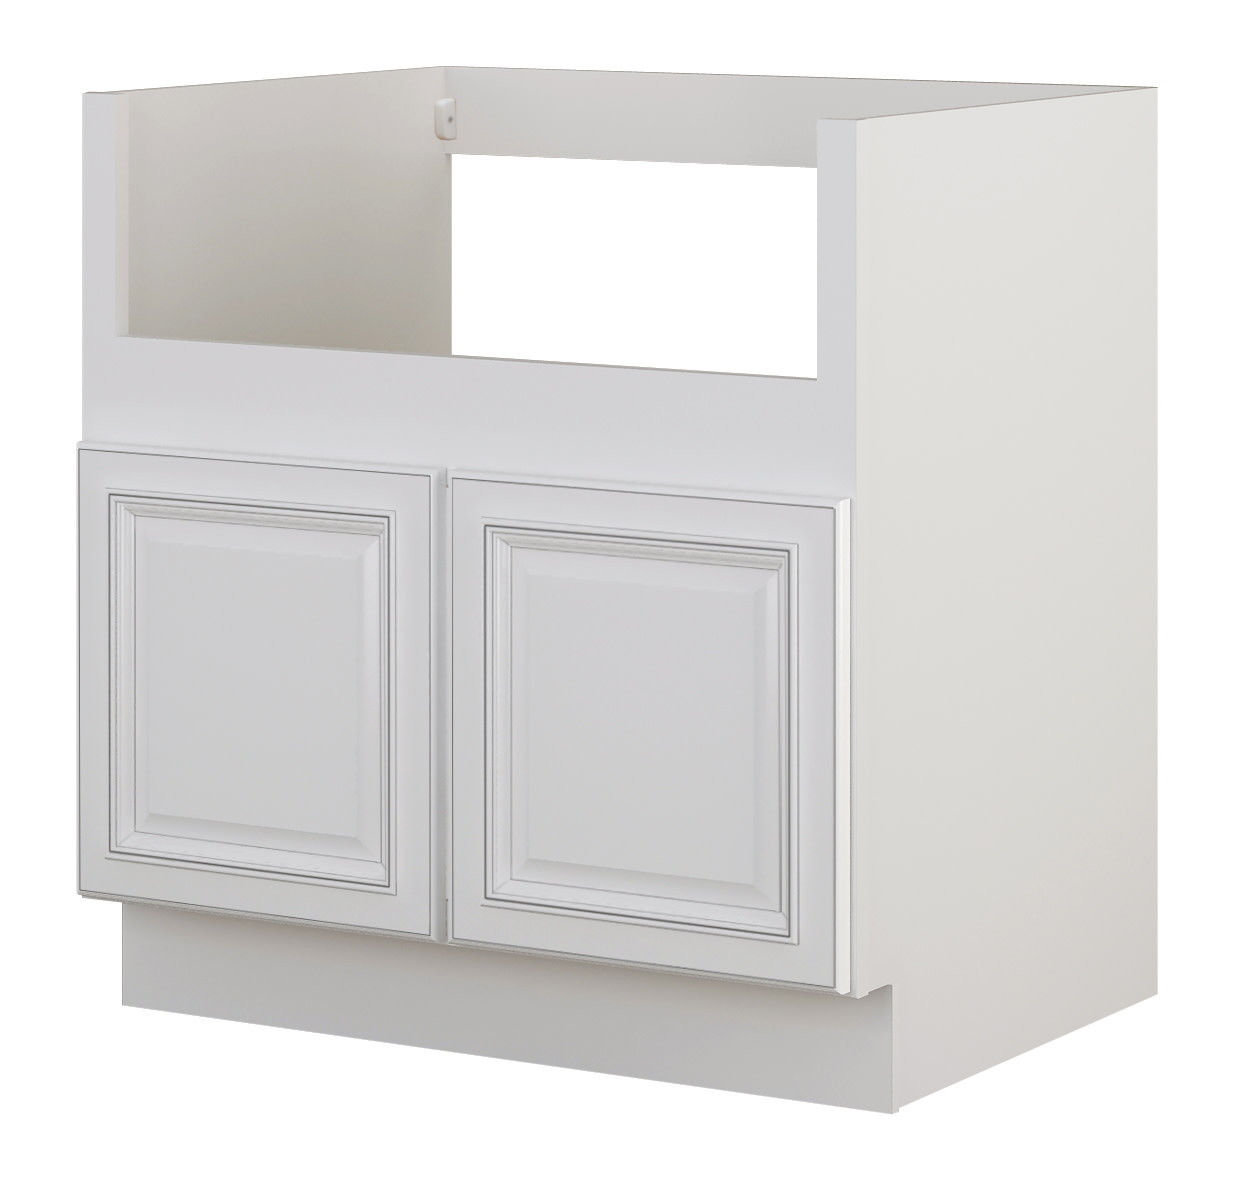 Sunny Wood Rlb33fs-A Riley 33" Wide X 34-1/2" High Double Door Base Cabinet For Farmhouse - image 1 of 5